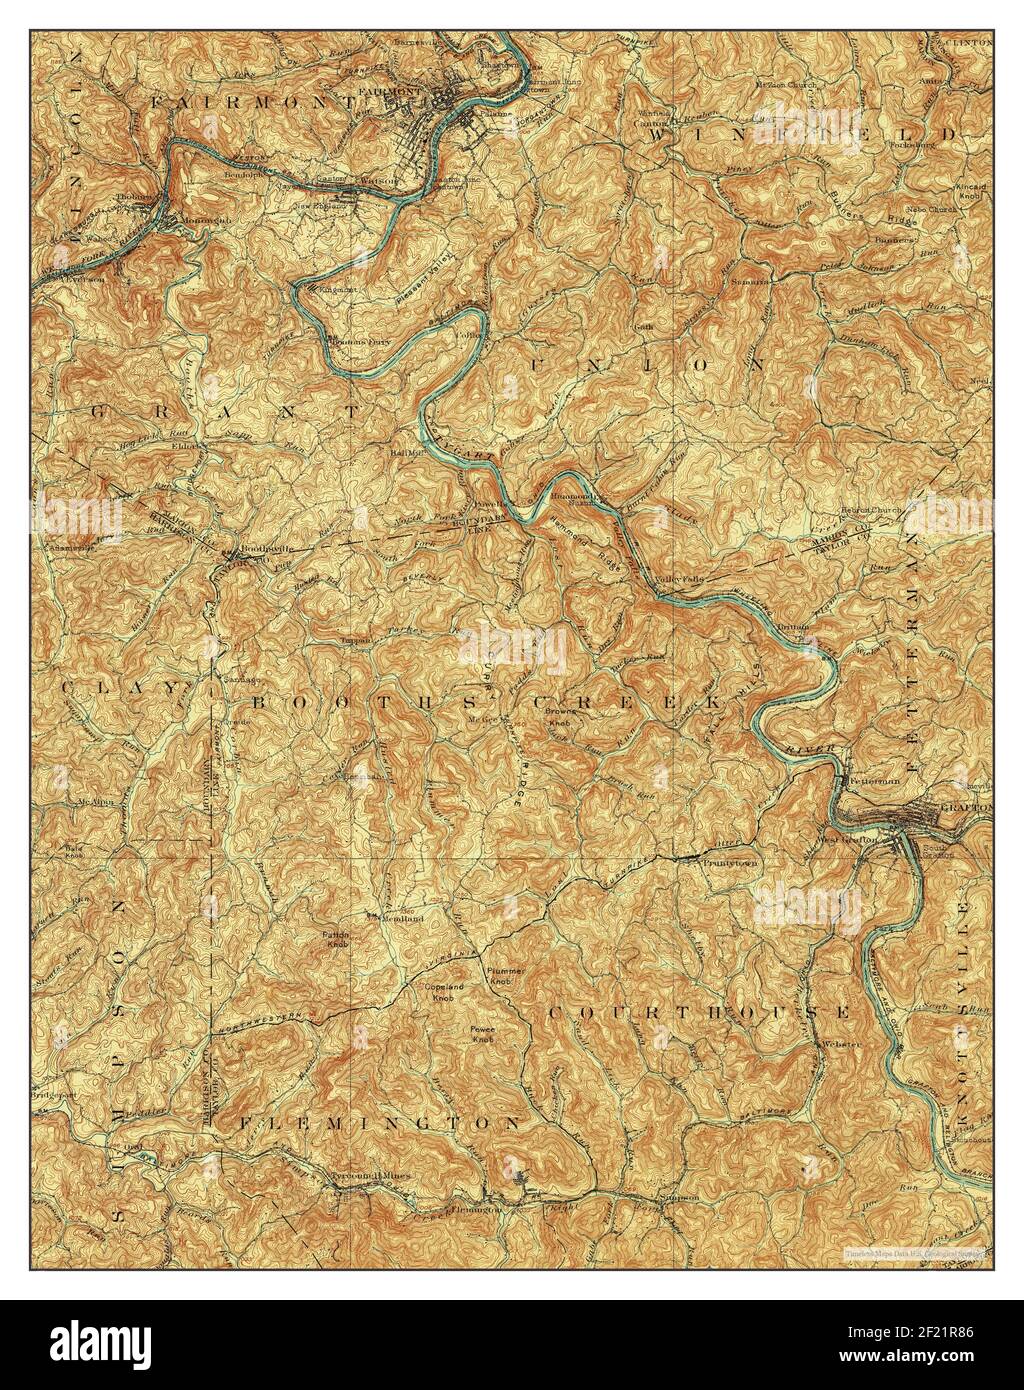 Fairmont West Virginia Map 1902 162500 United States Of America By Timeless Maps Data Us 7776